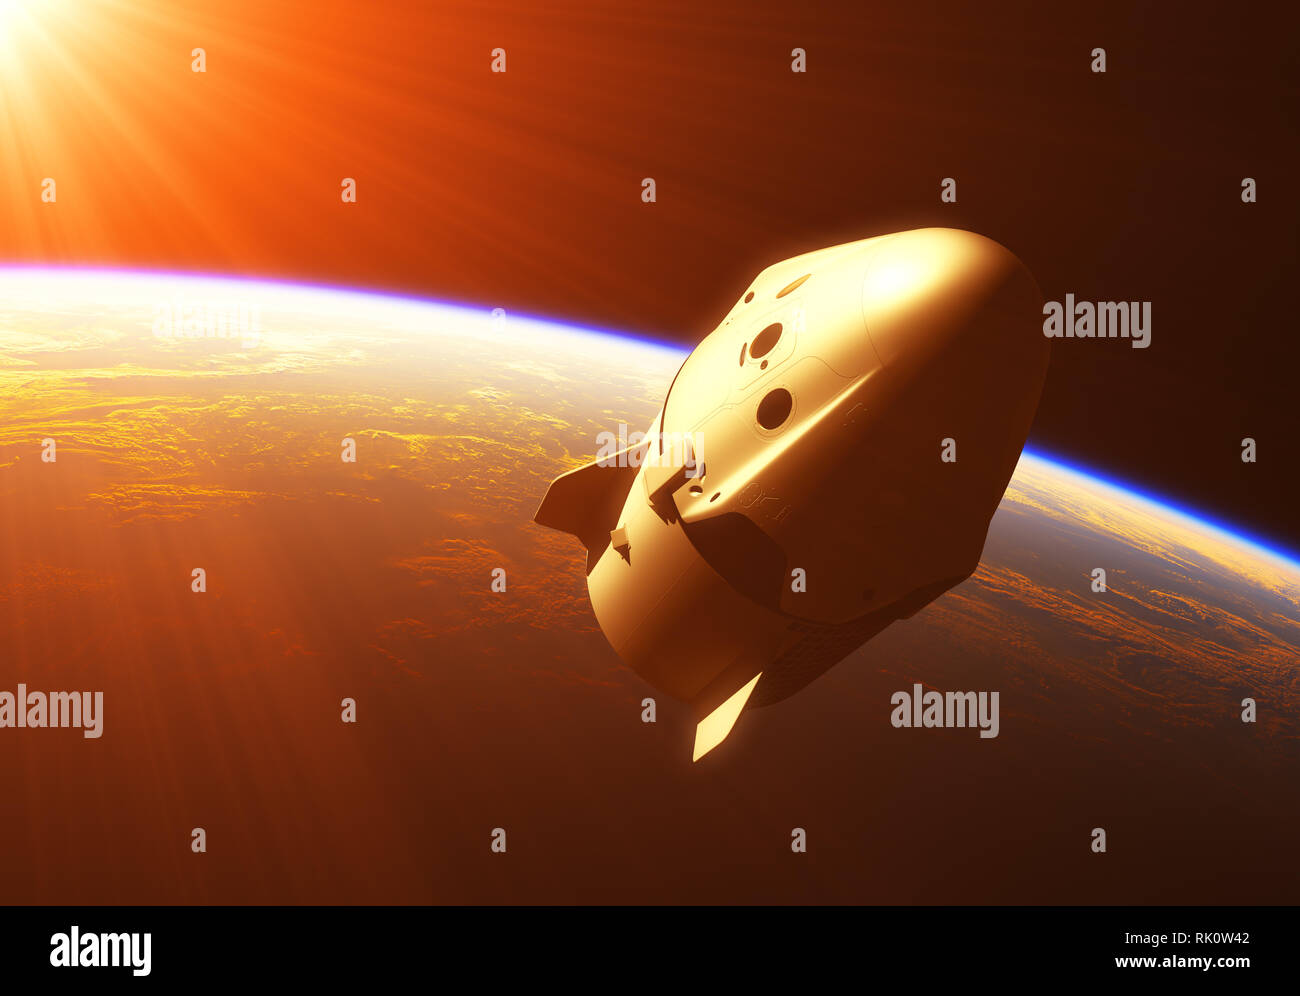 Commercial Spacecraft In The Rays Of Rising Sun. 3D Illustration. Stock Photo